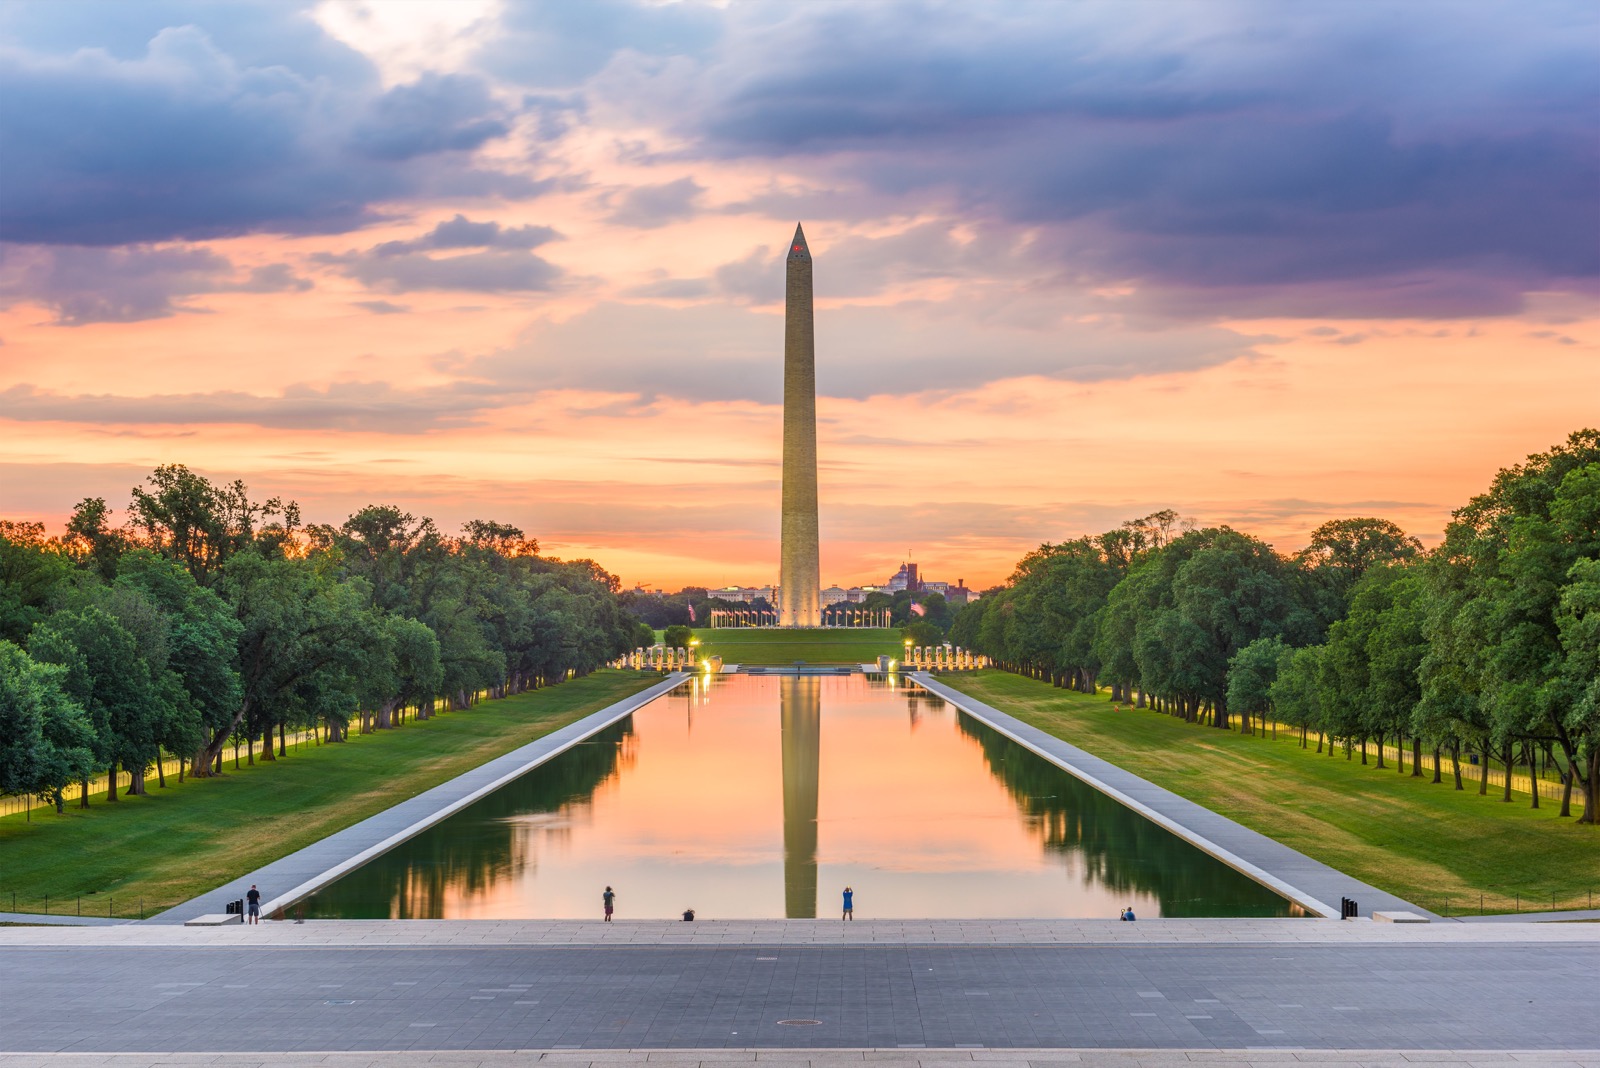 If You Score 14/20 on This Random Knowledge Quiz, 🧠 Your Brain May Be Too Big Washington Monument And The Reflecting Pool